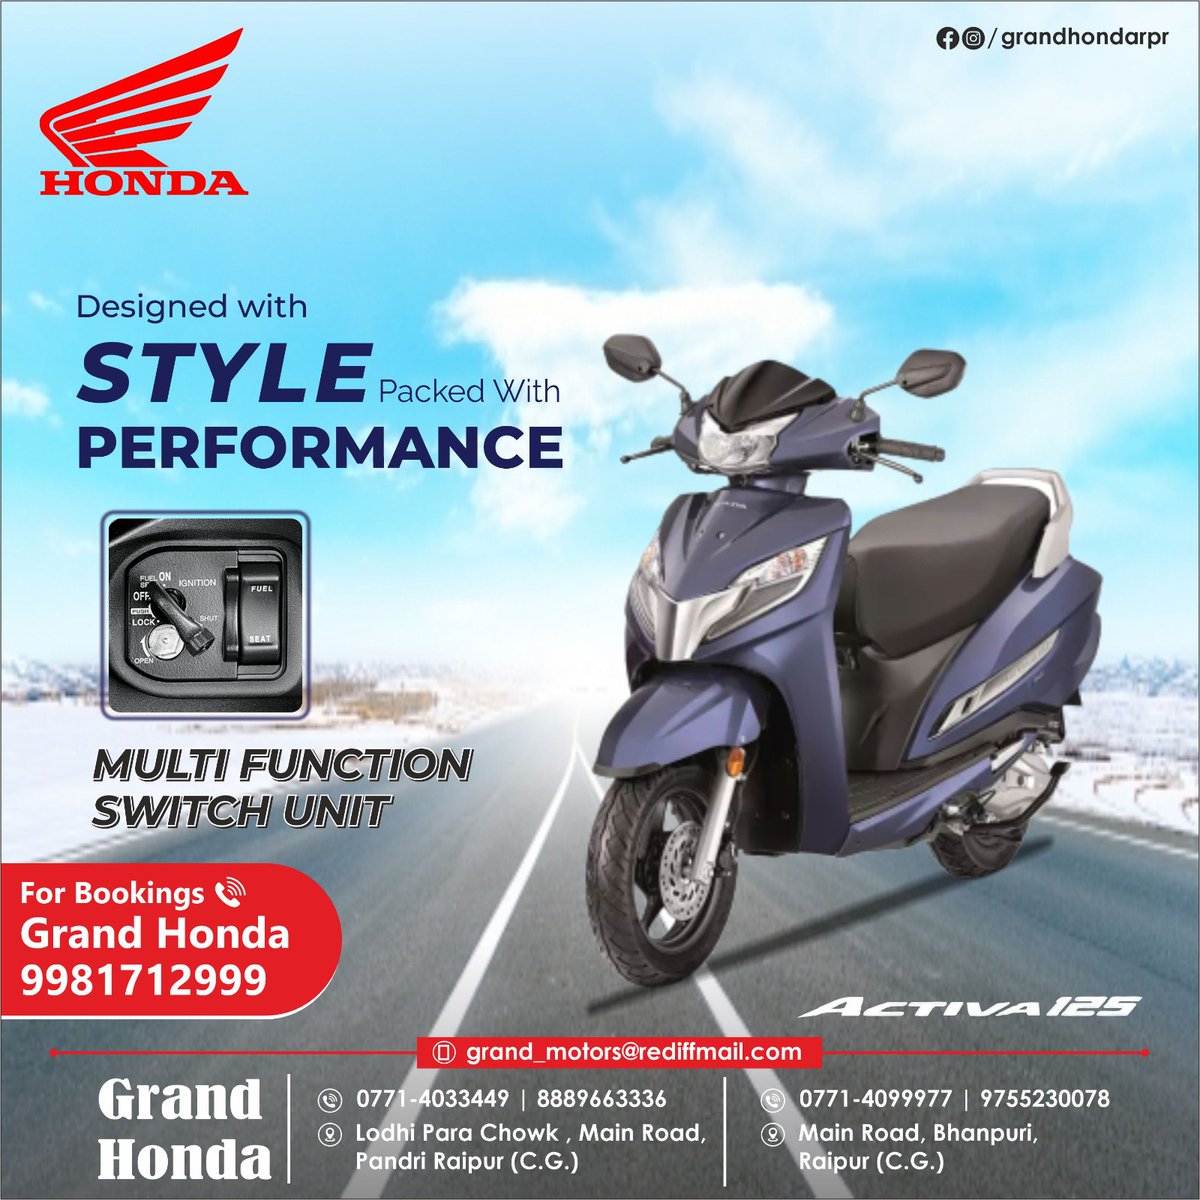 Activa 125: Style, performance, and convenience all in one scooter.
.
.
BOOK YOUR HONDA NOW!!
.
.
.

#grandhonda #Activa125 #ScooterStyle #PerformanceOnWheels #ConvenienceMatters #ScooterPerfection #StyleAndPower #EffortlessRides #ScooterLife #CruisingInStyle